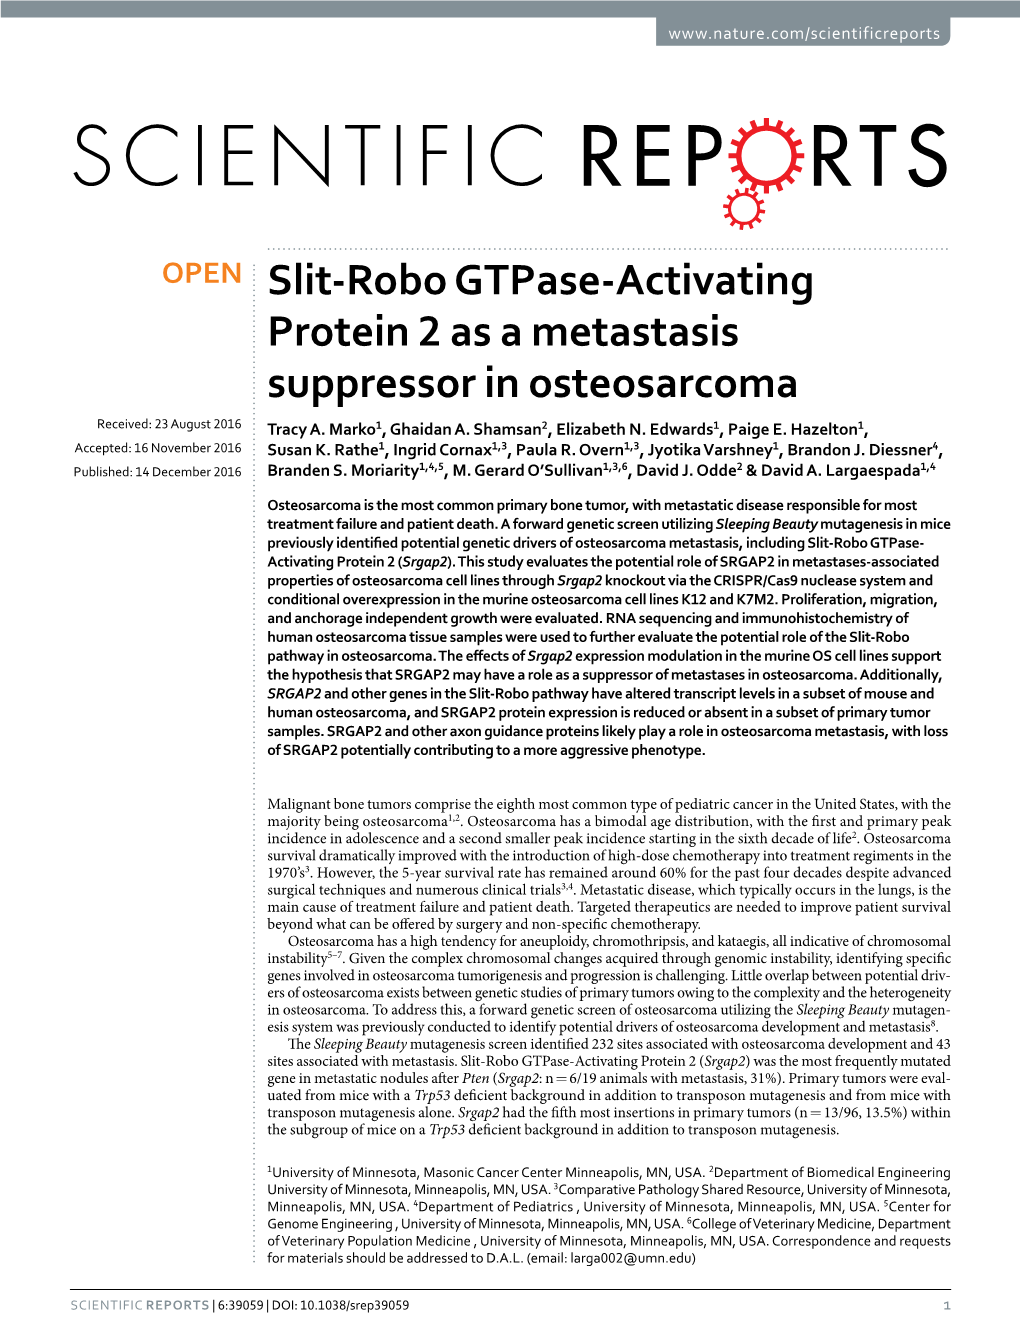 Slit-Robo Gtpase-Activating Protein 2 As a Metastasis Suppressor in Osteosarcoma Received: 23 August 2016 Tracy A